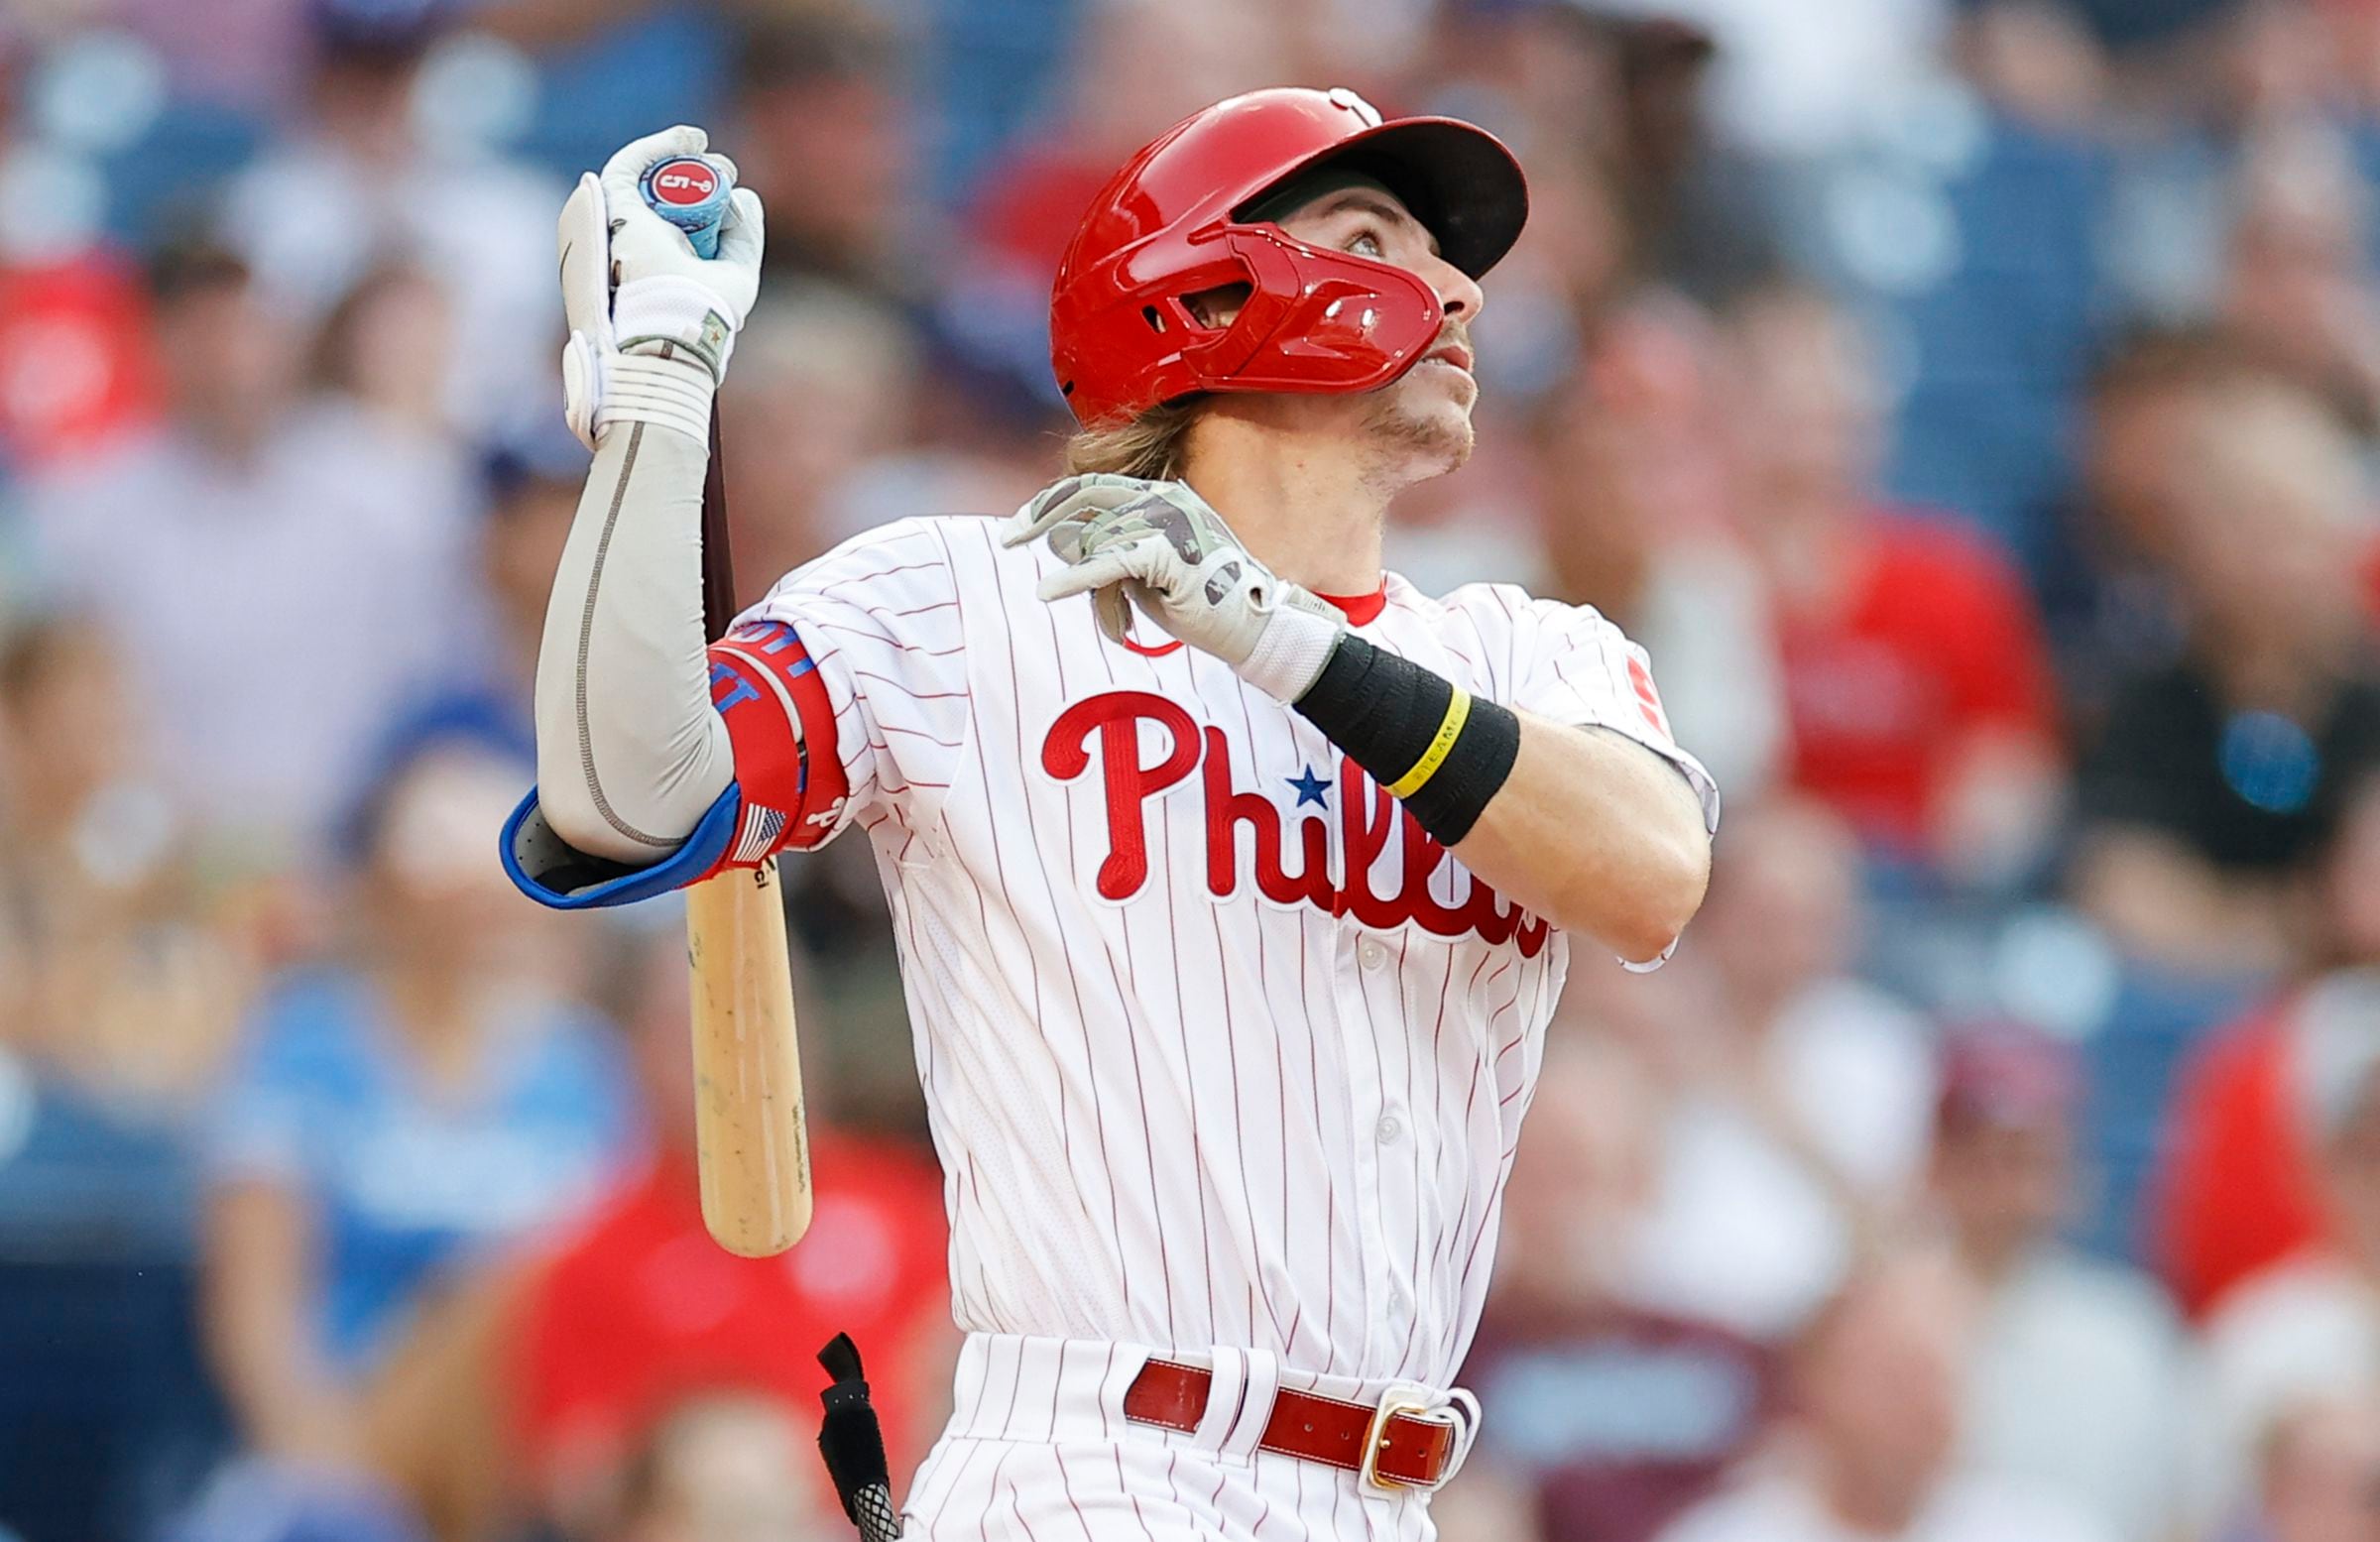 Bryson Stott unaware of grand slam heroics, admits getting 'blacked out' in  Phillies' Wild Card victory - I didn't know I did that